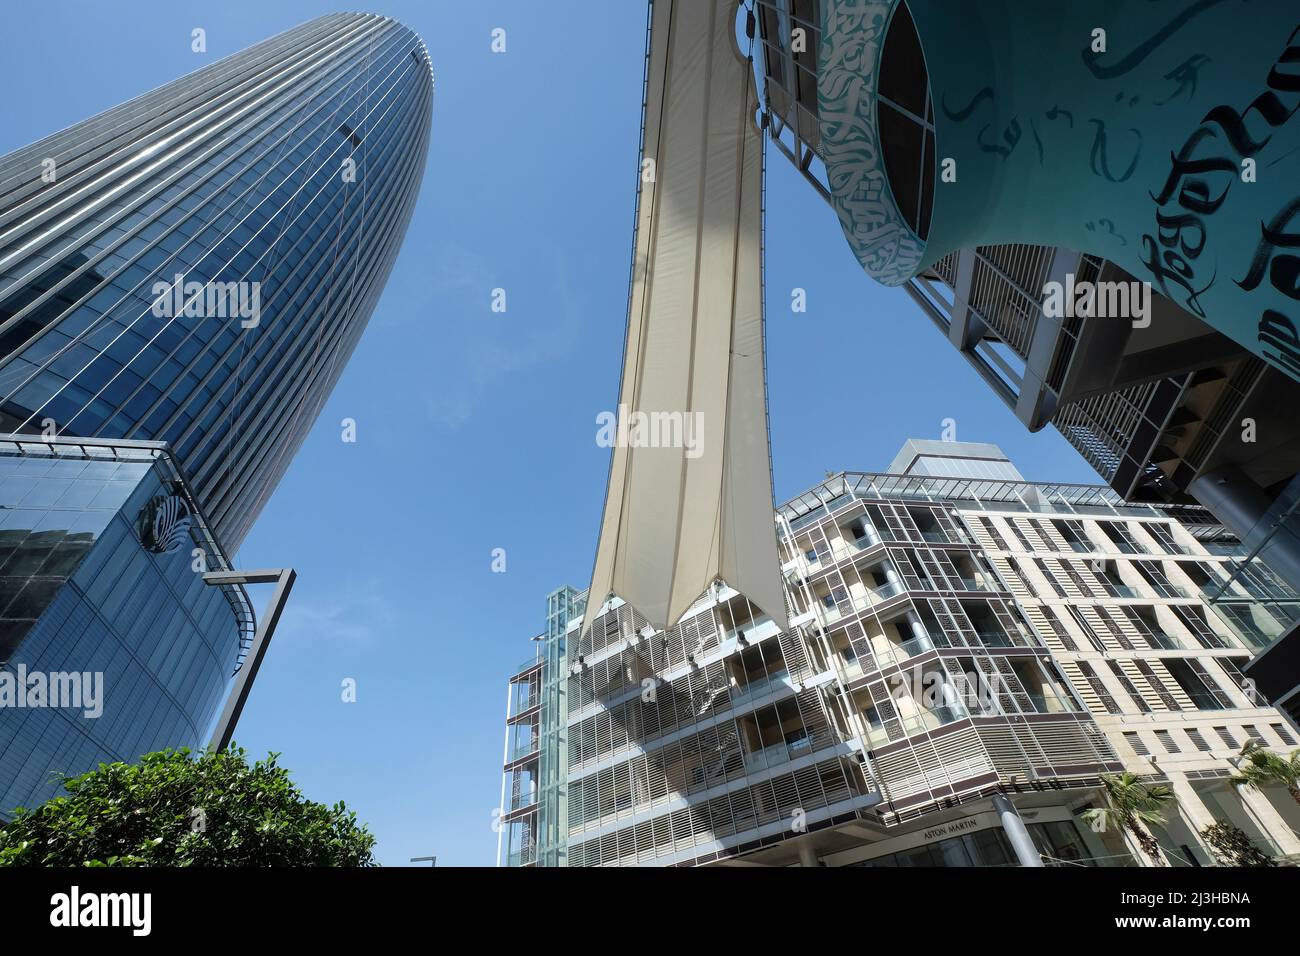 Low angle view of the Abdali Shopping Mall. A modern shopping mall next to Damac Tower building condominium complex. Amman, Jordan Stock Photo